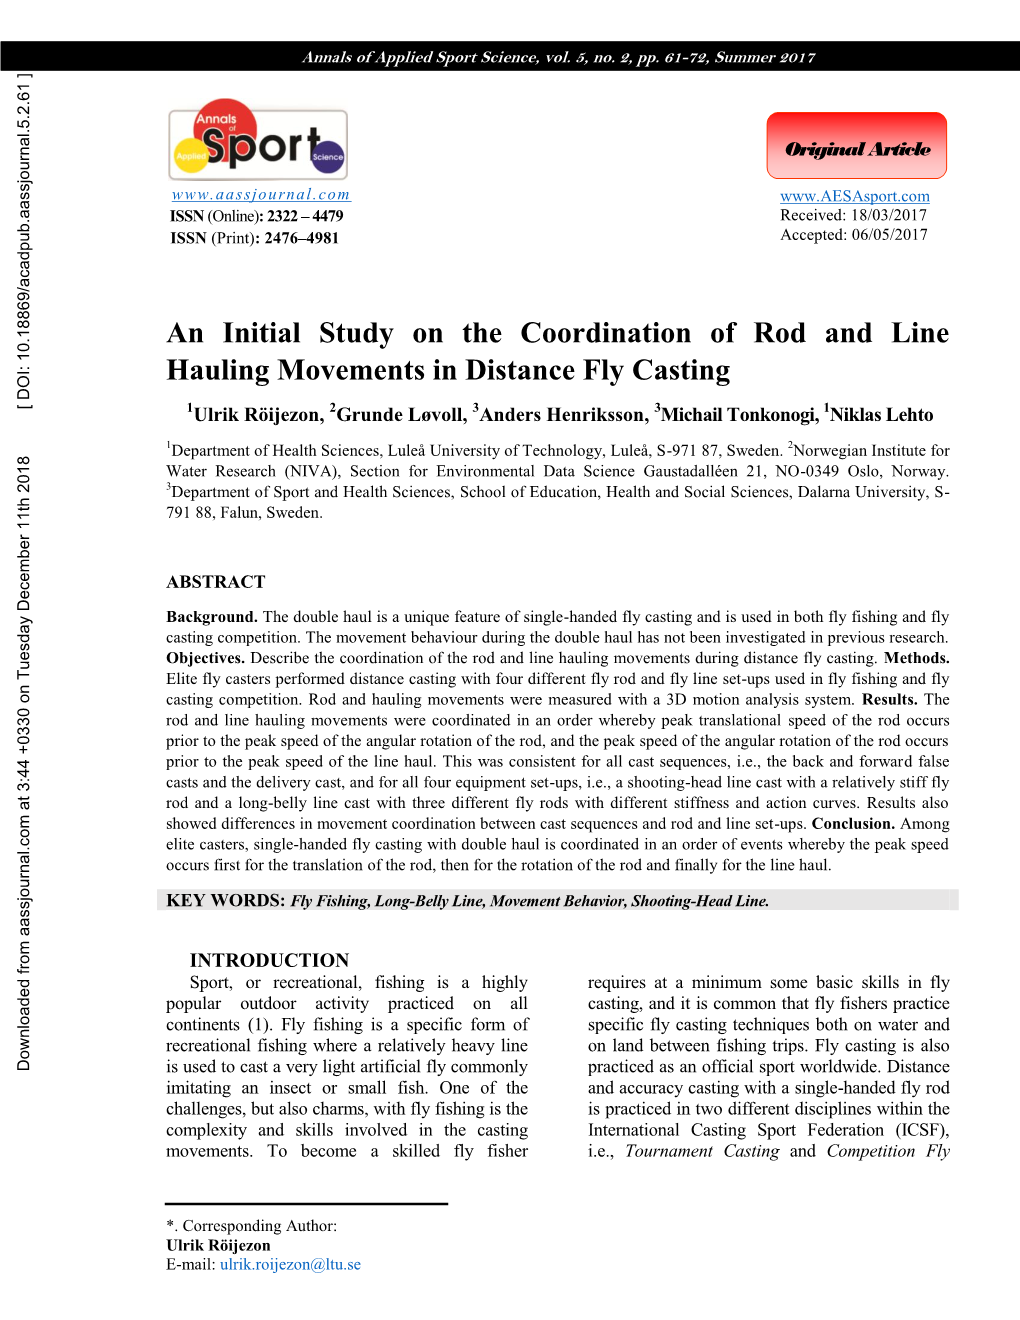 An Initial Study on the Coordination of Rod and Line Hauling Movements